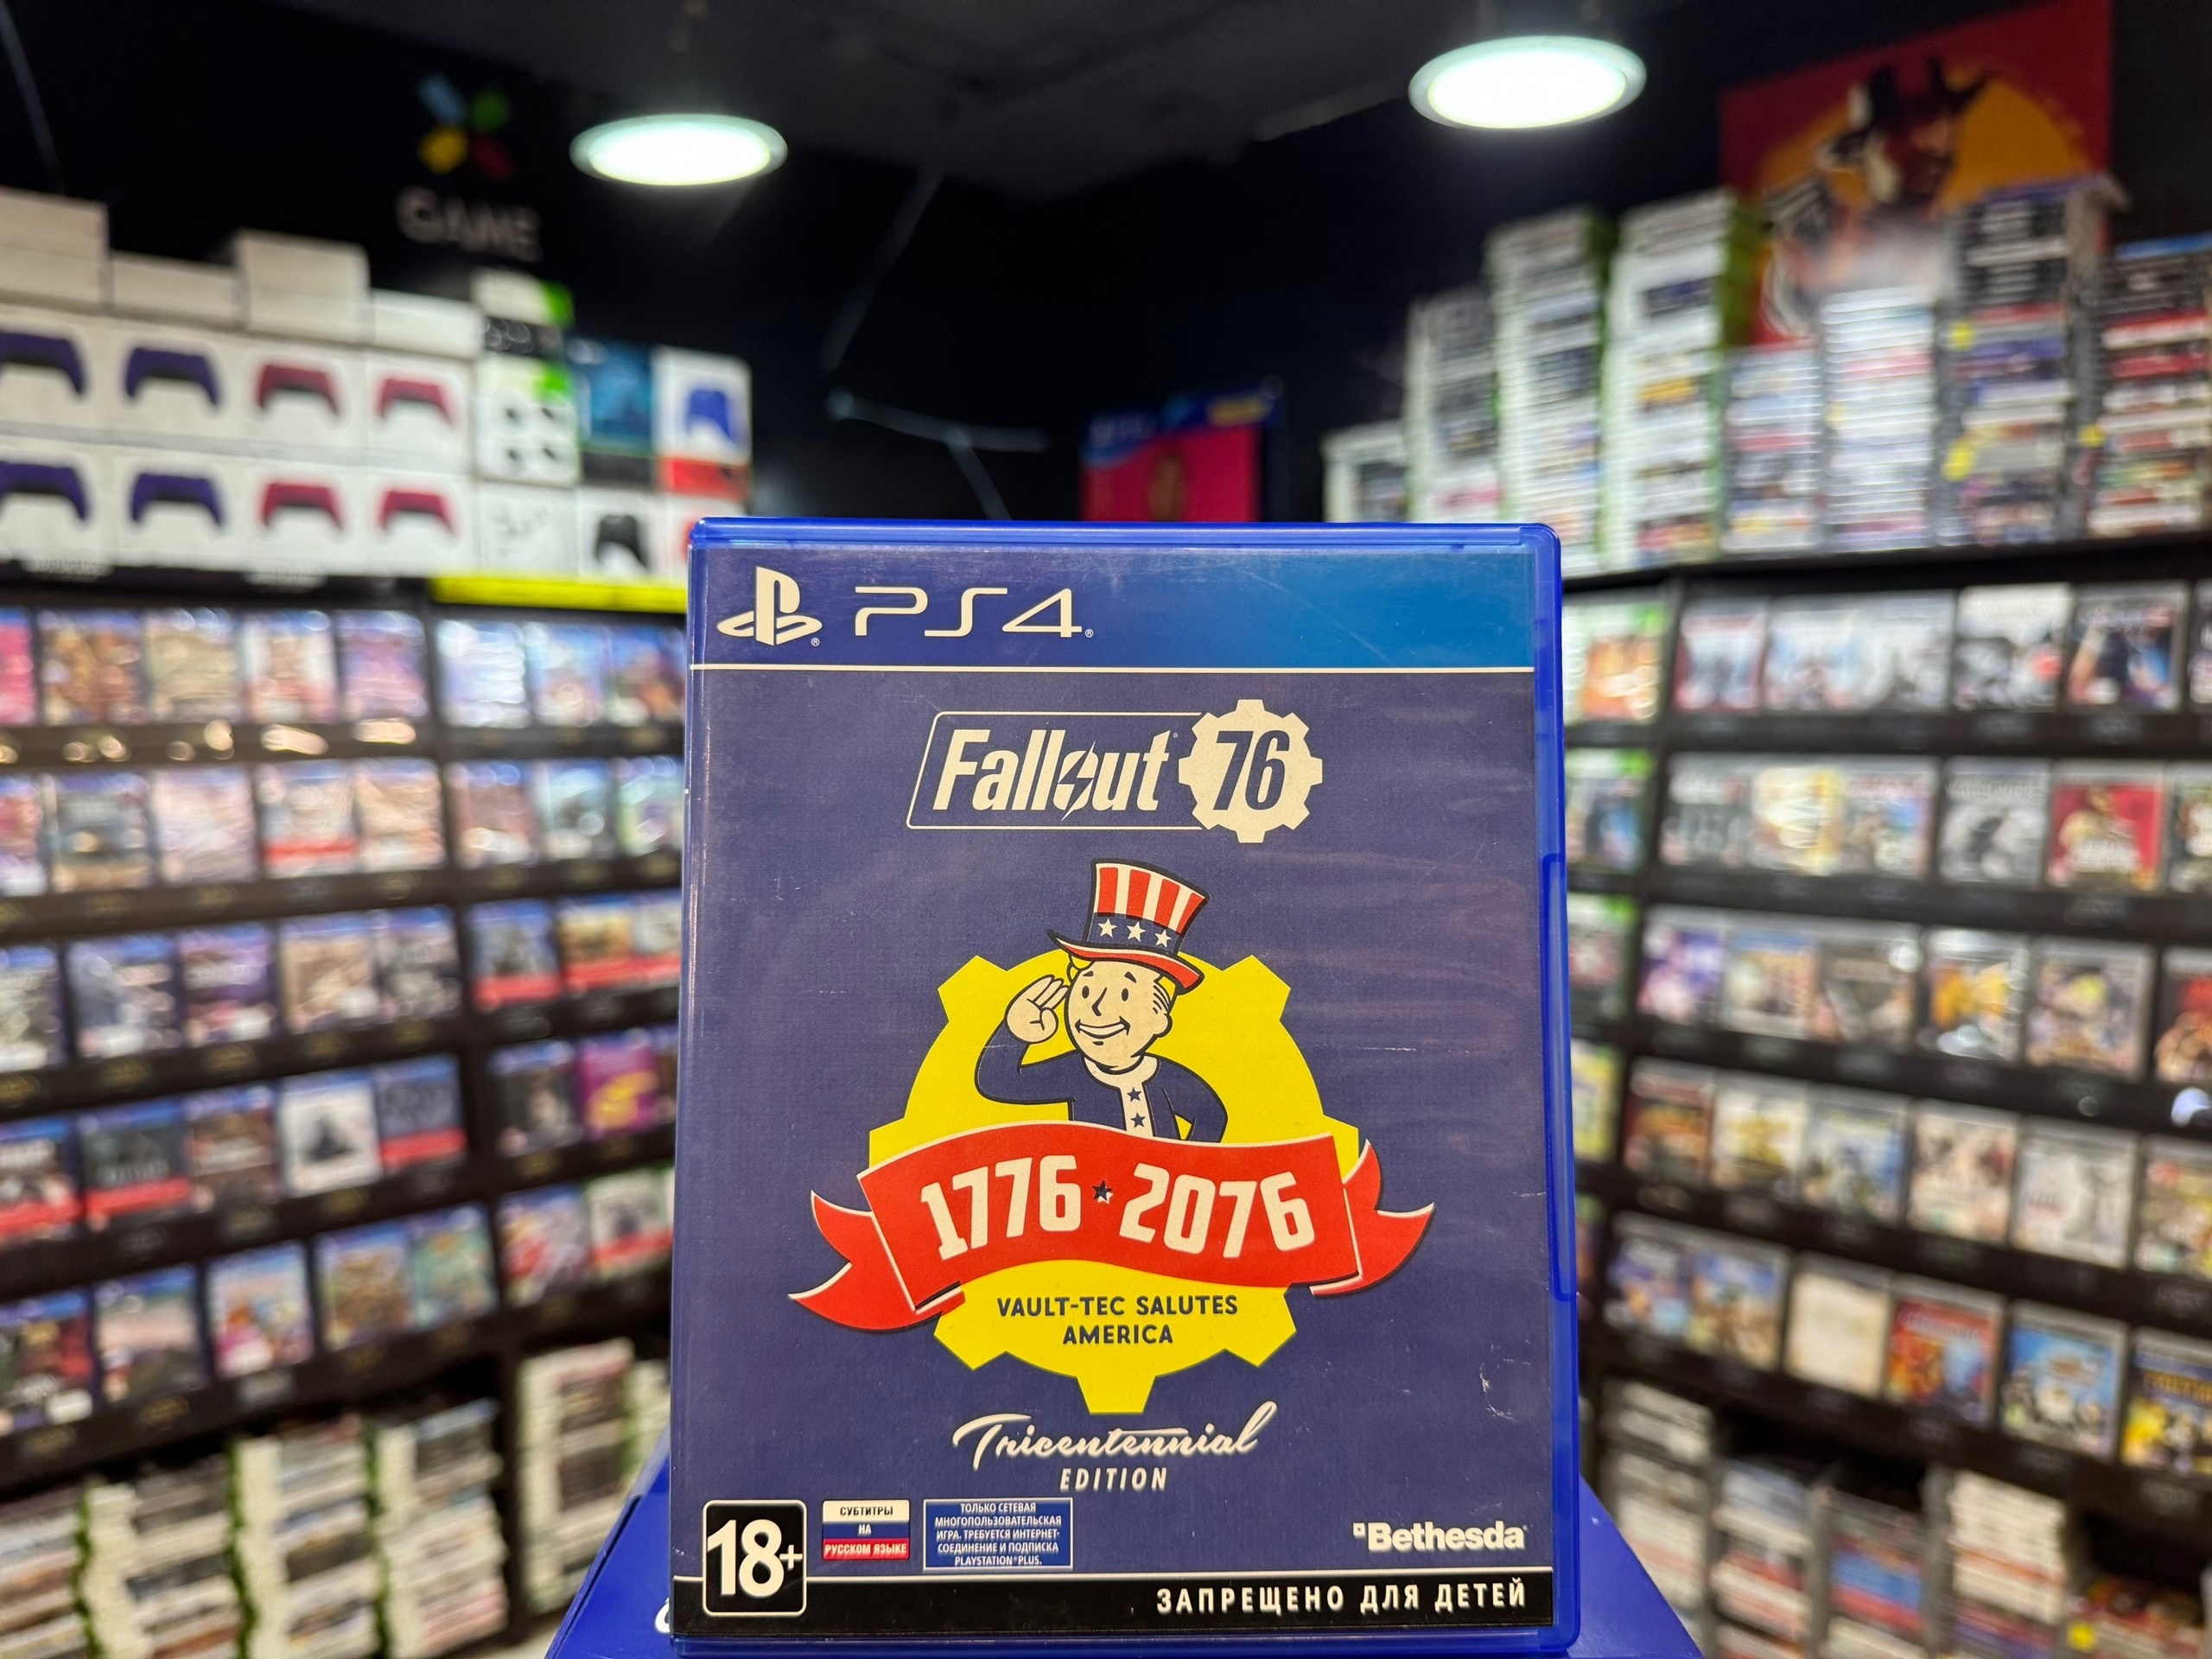 Fallout 76 PS4